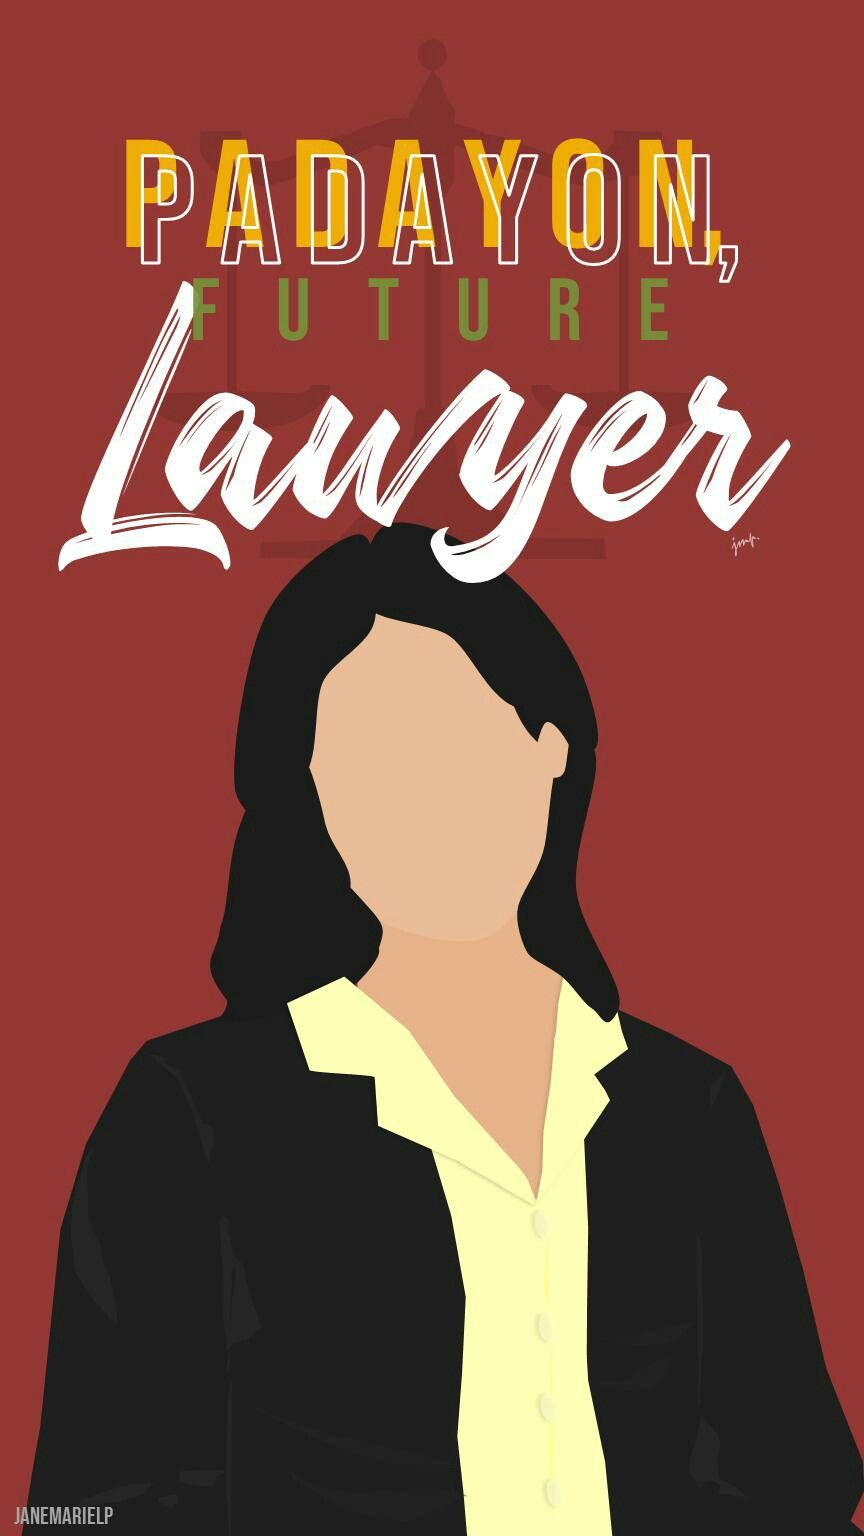 Padayon, Future Lawyer (Girl). Law school inspiration, Lawyer quotes, Law school life